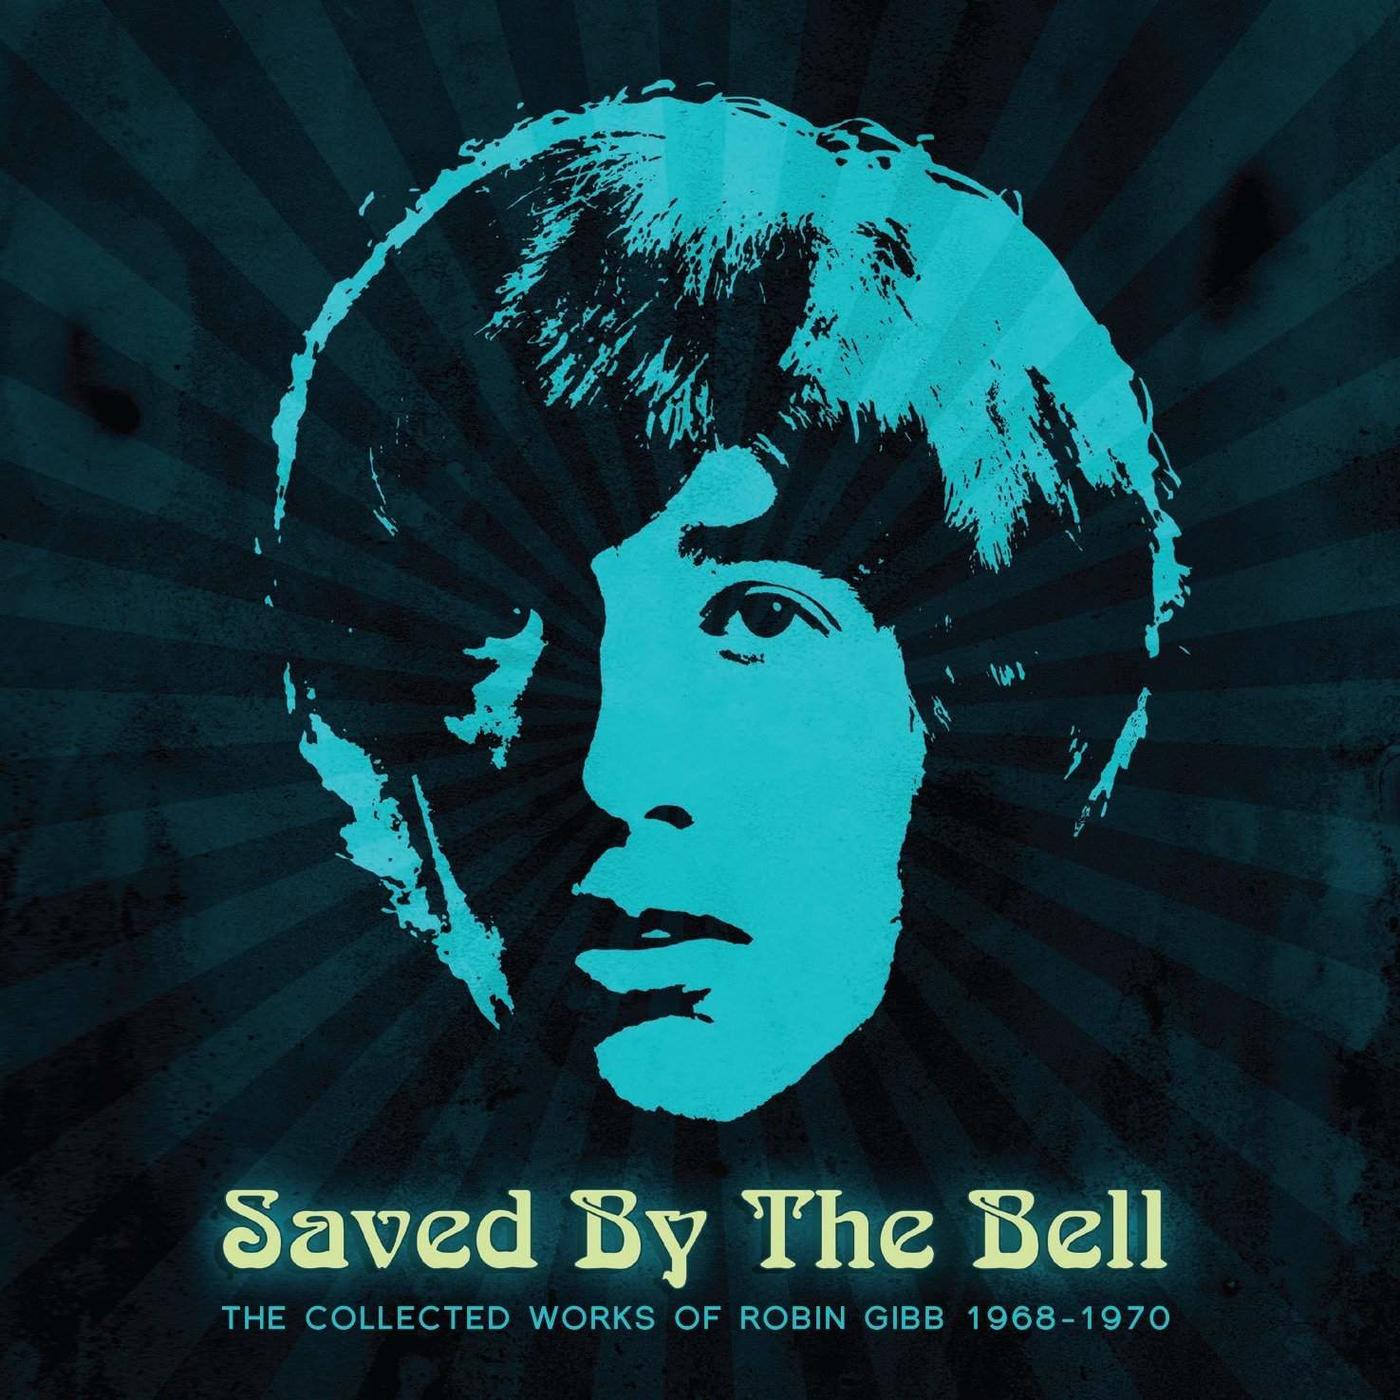 Saved By The Bell: The Collected Works of Robin Gibb 1968-1970